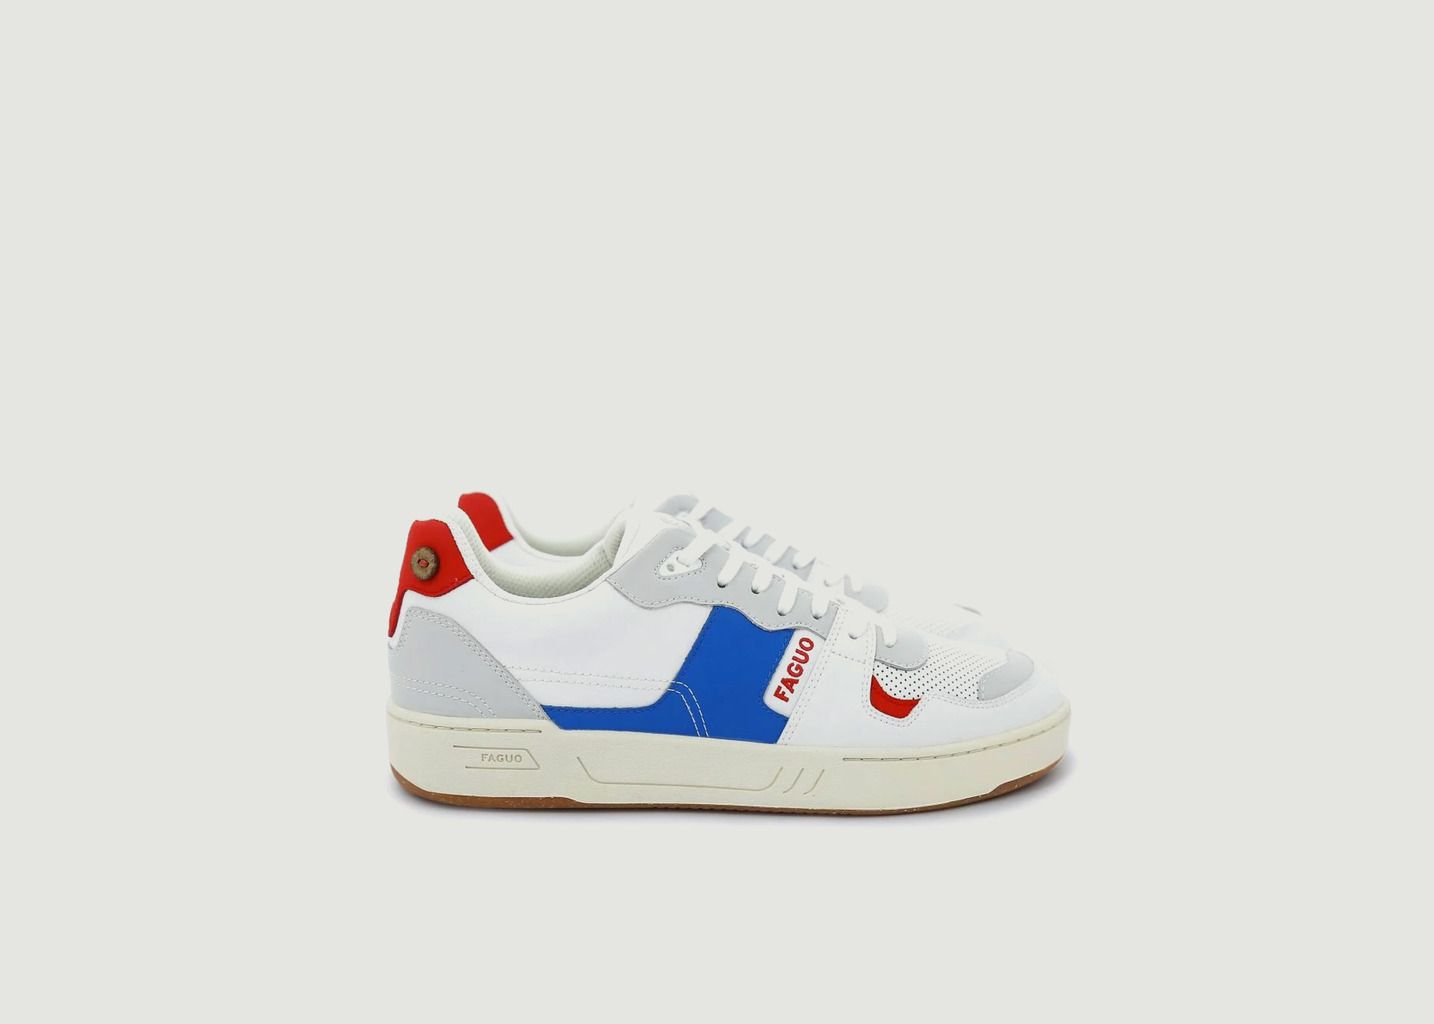 Faguo White and Blue Ceiba Sneakers